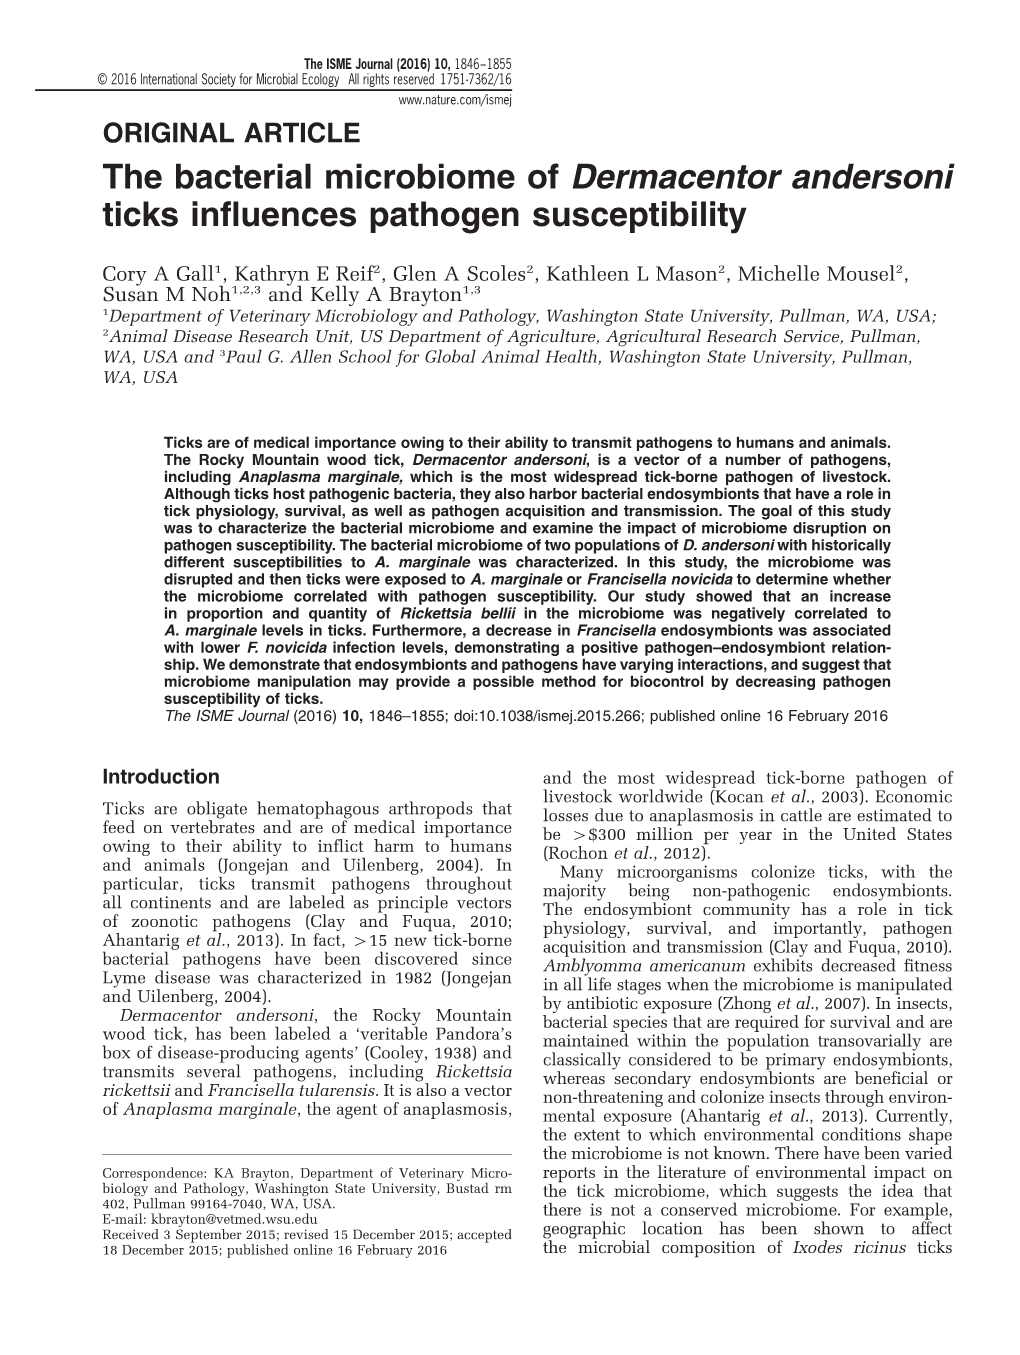 The Bacterial Microbiome of Dermacentor Andersoni Ticks Influences Pathogen Susceptibility